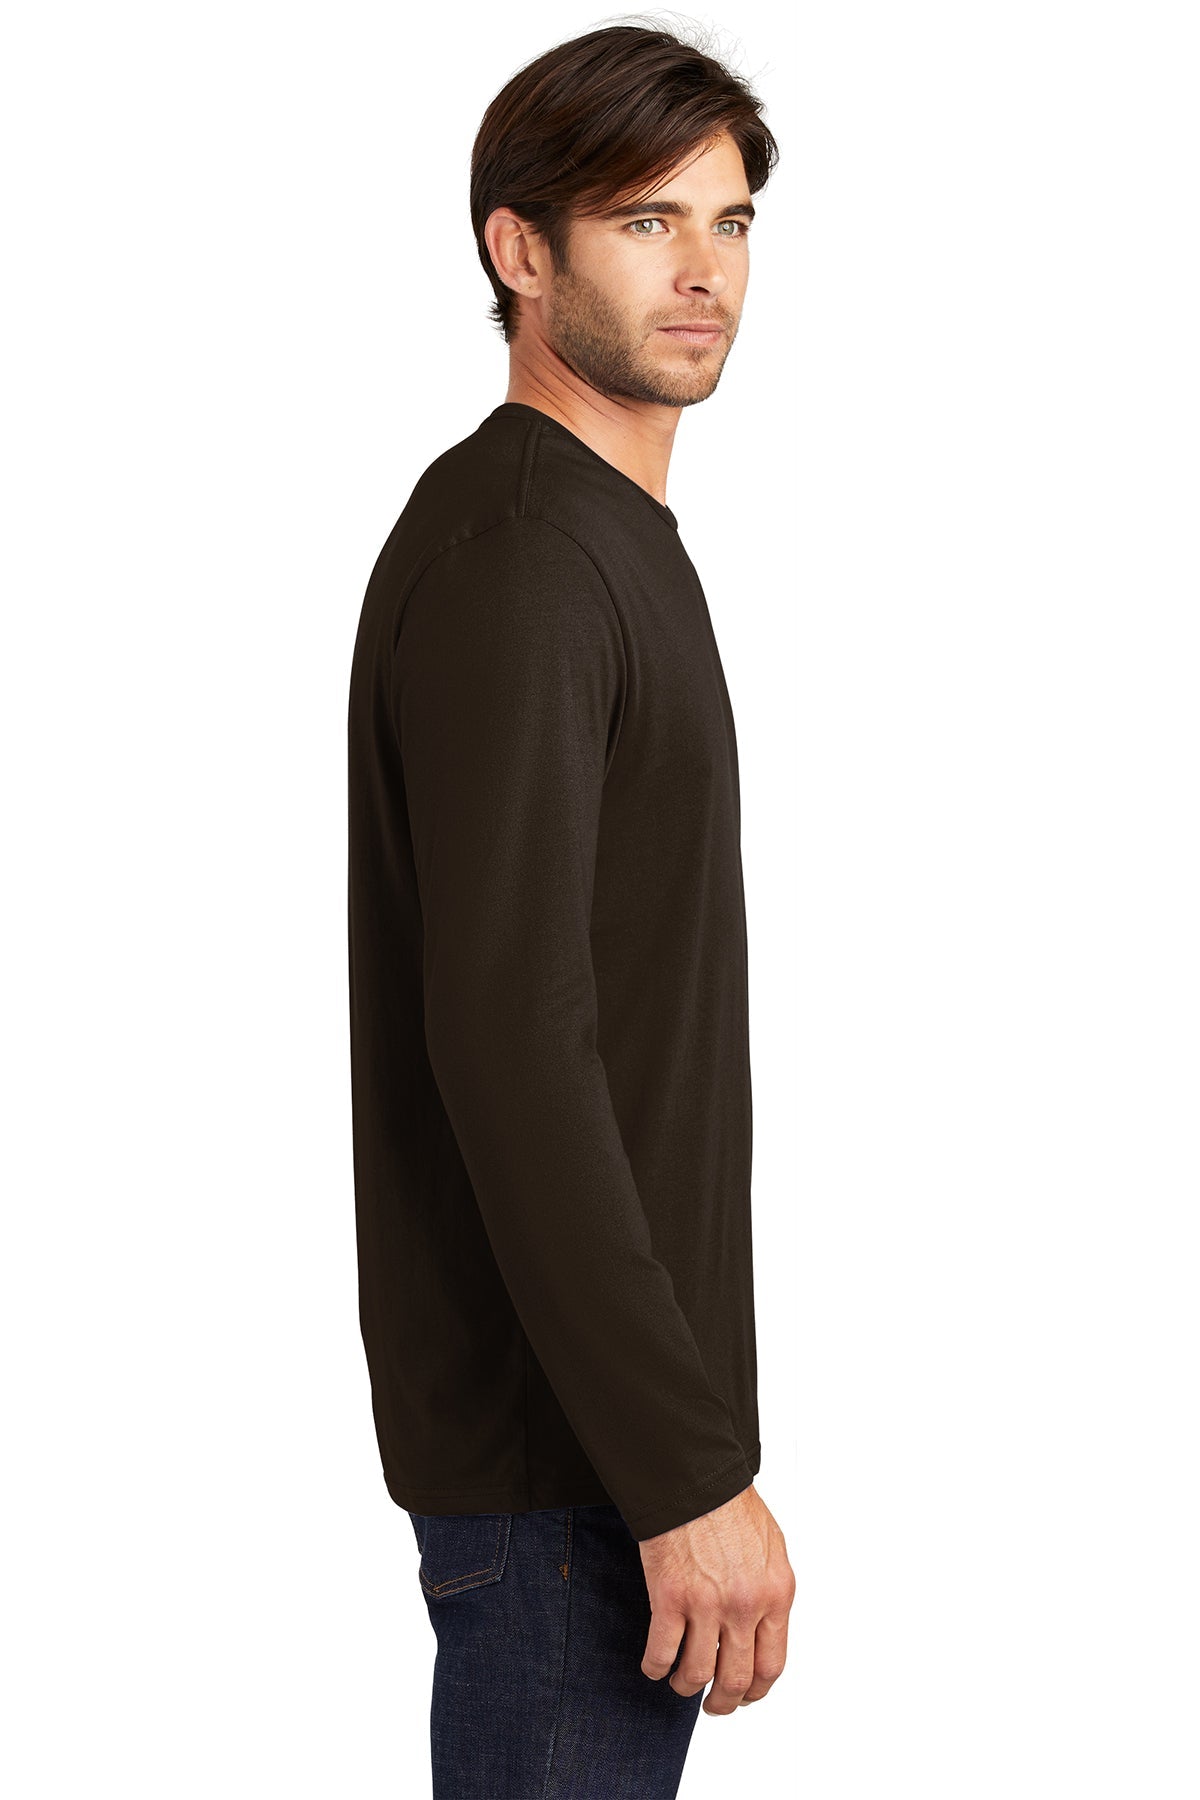 District Made Mens Perfect Weight Long Sleeve Tee